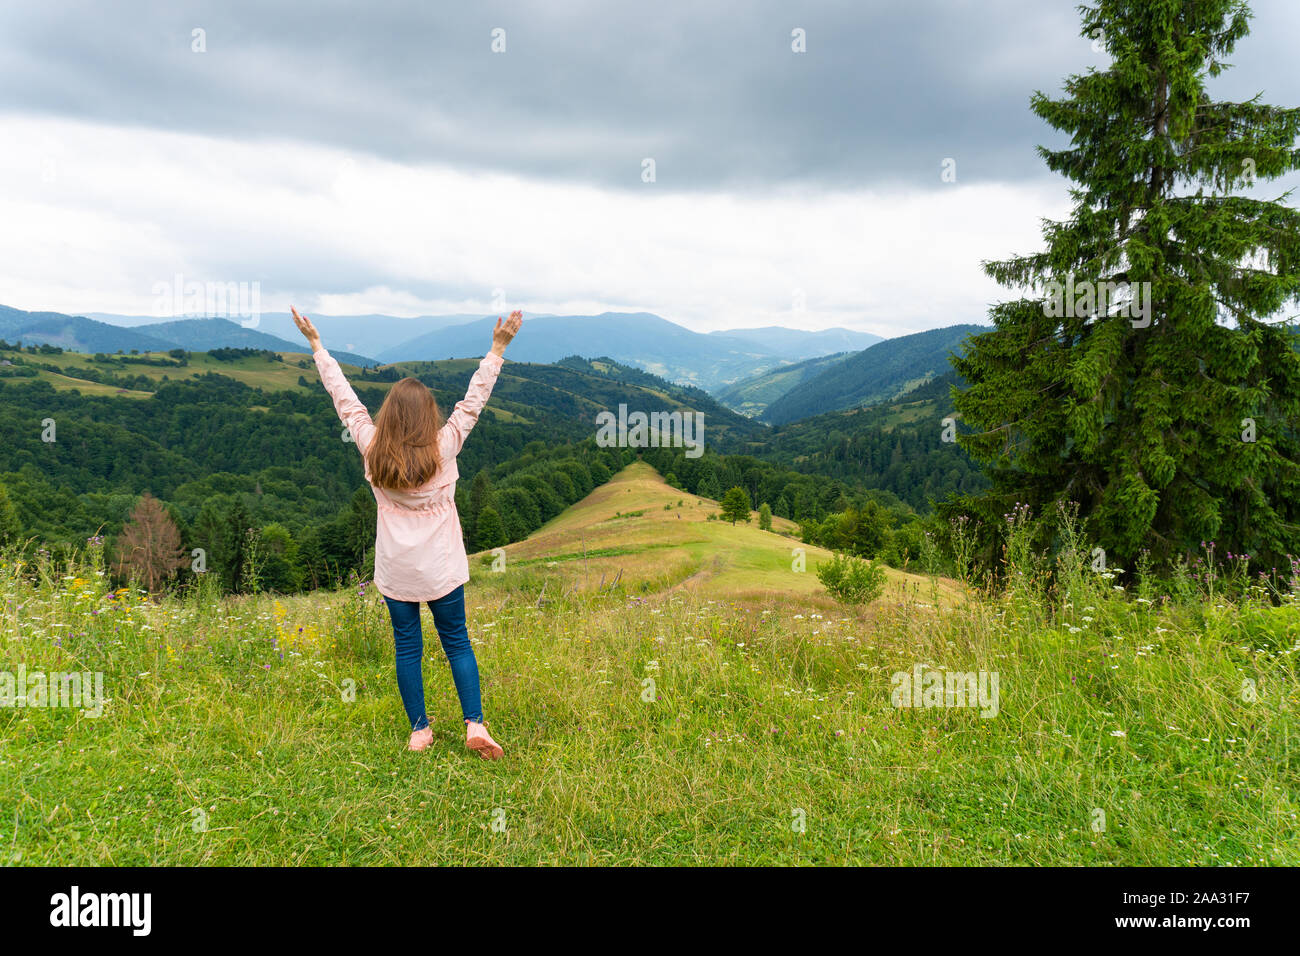 Happy woman standing on green hill and looking at mountains Stock Photo